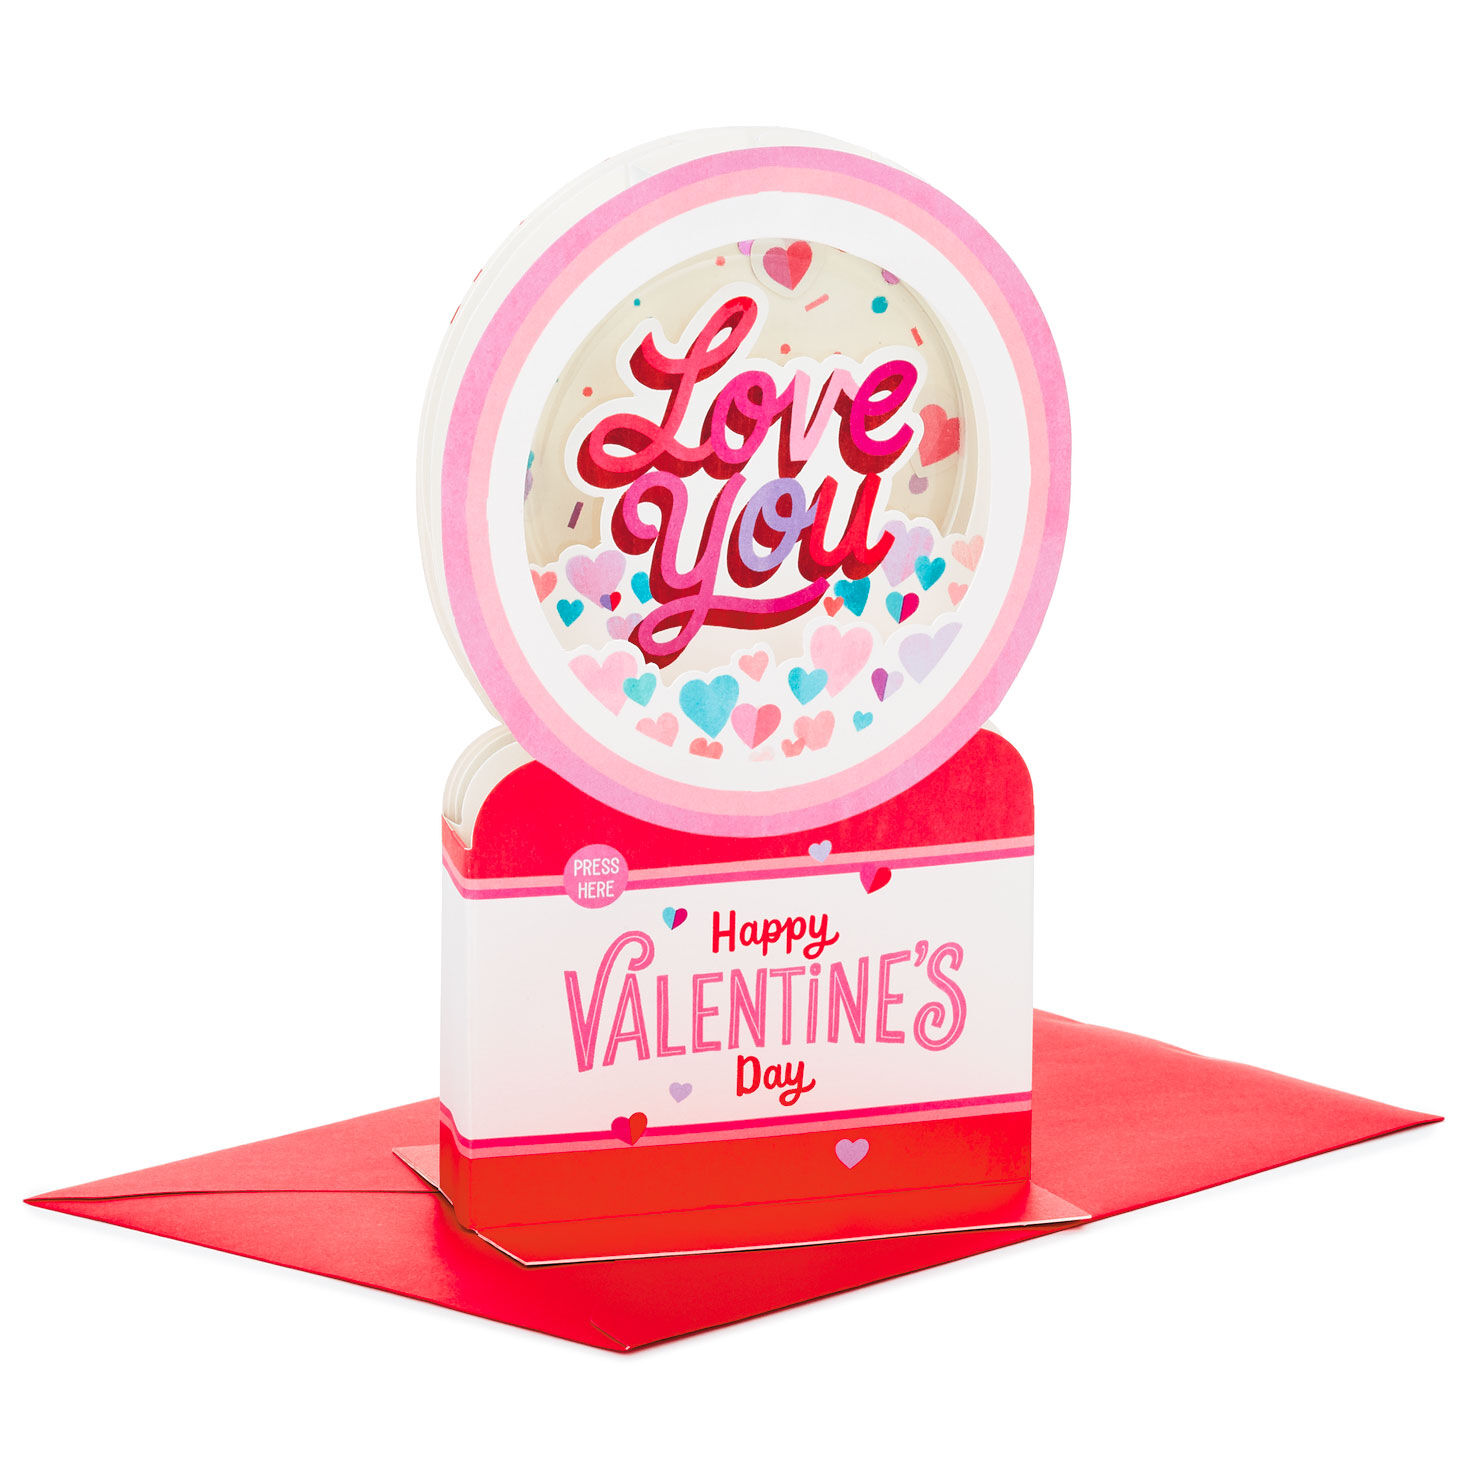 Disney Hallmark Party Minnie Mouse Bow-Tique Valentines Day Cards Box of 32 